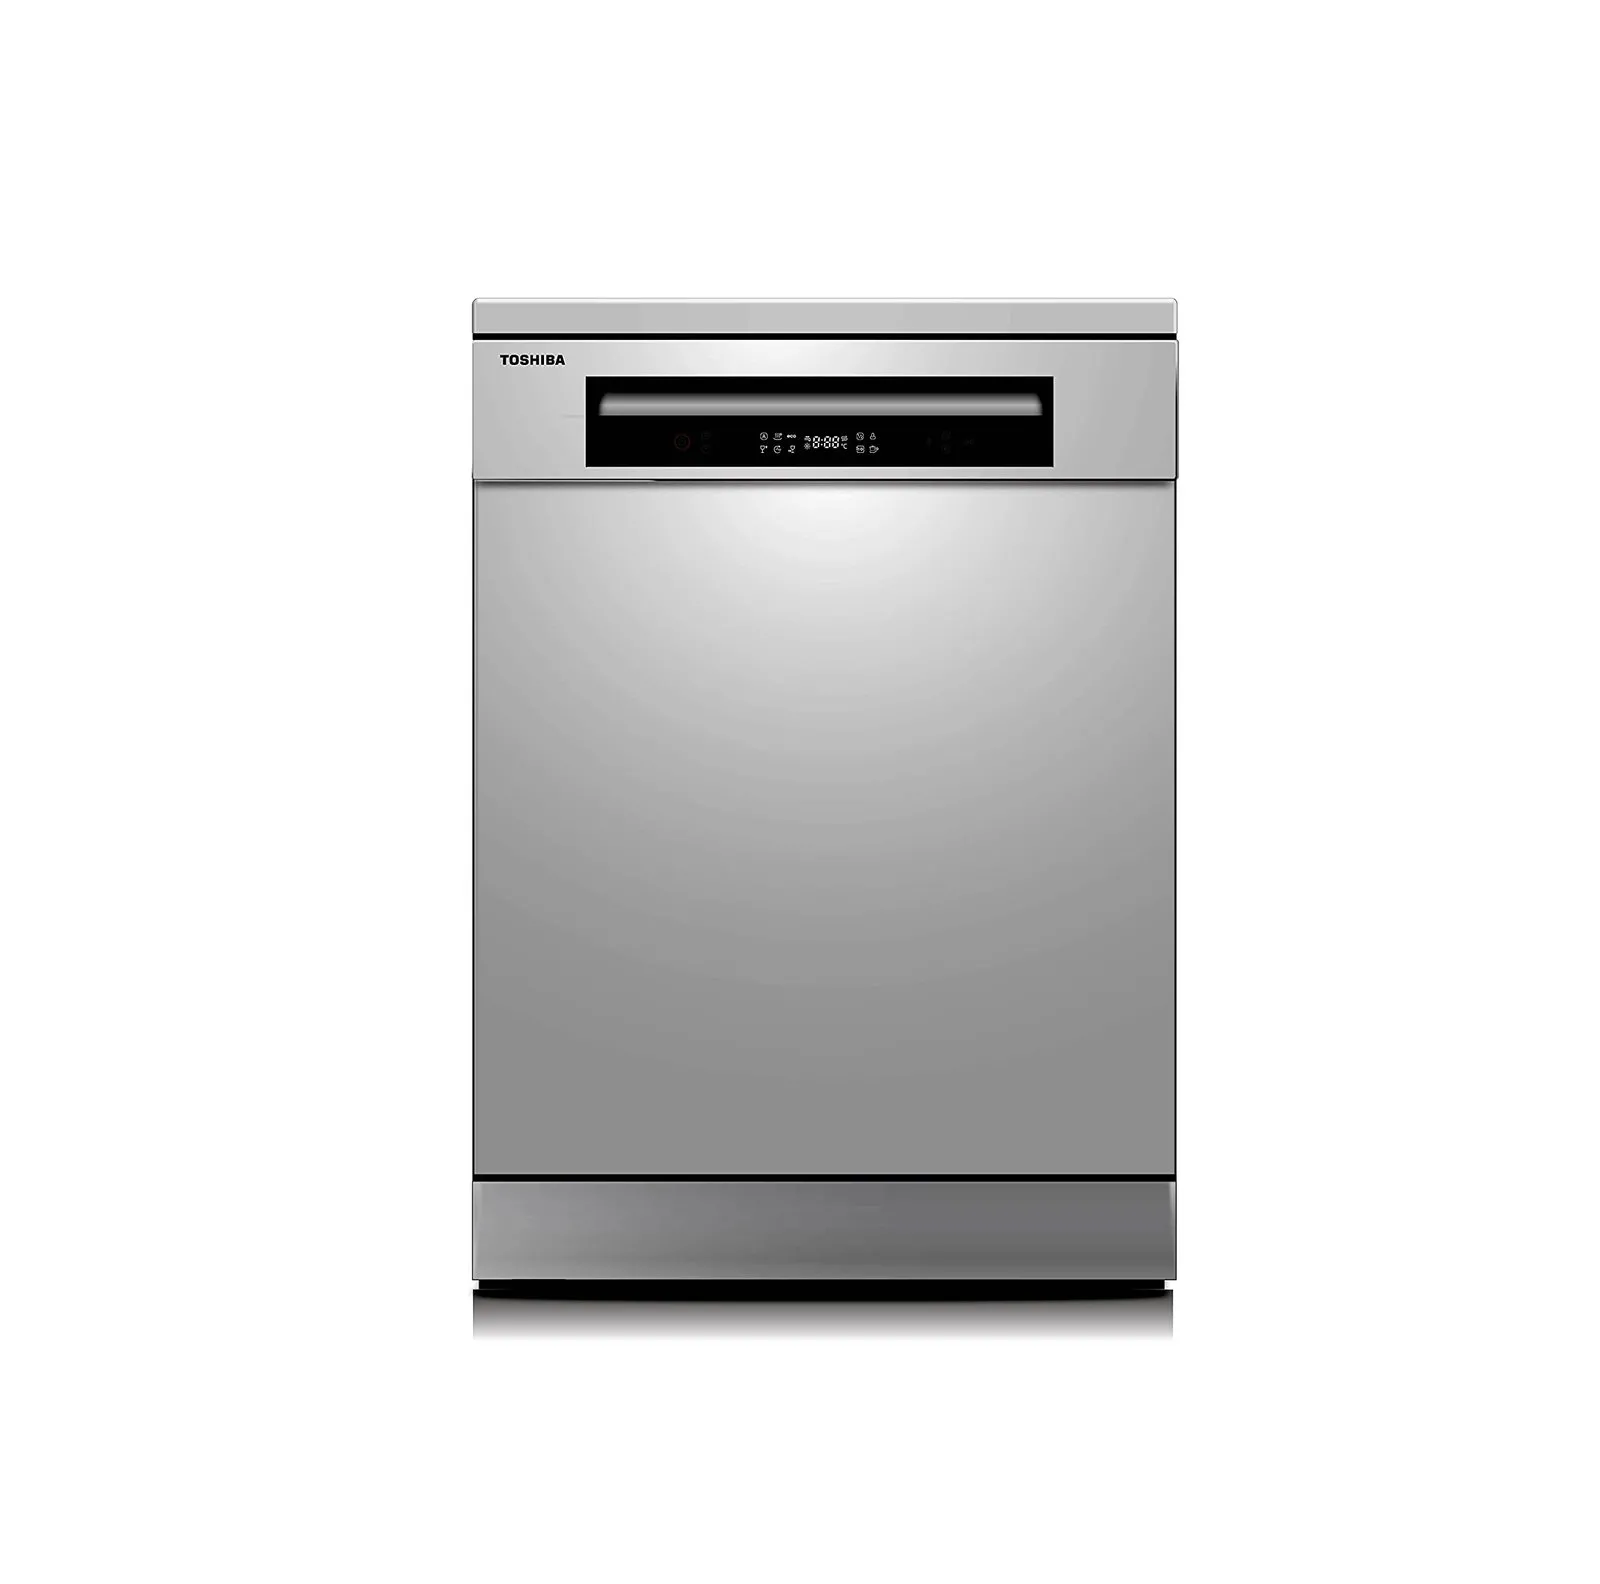 Toshiba 14 Place Setting 6 Programs Free Standing Dishwasher With Dual Wash Zone Silver Model DW14F1(S) | 1 Year Warranty.